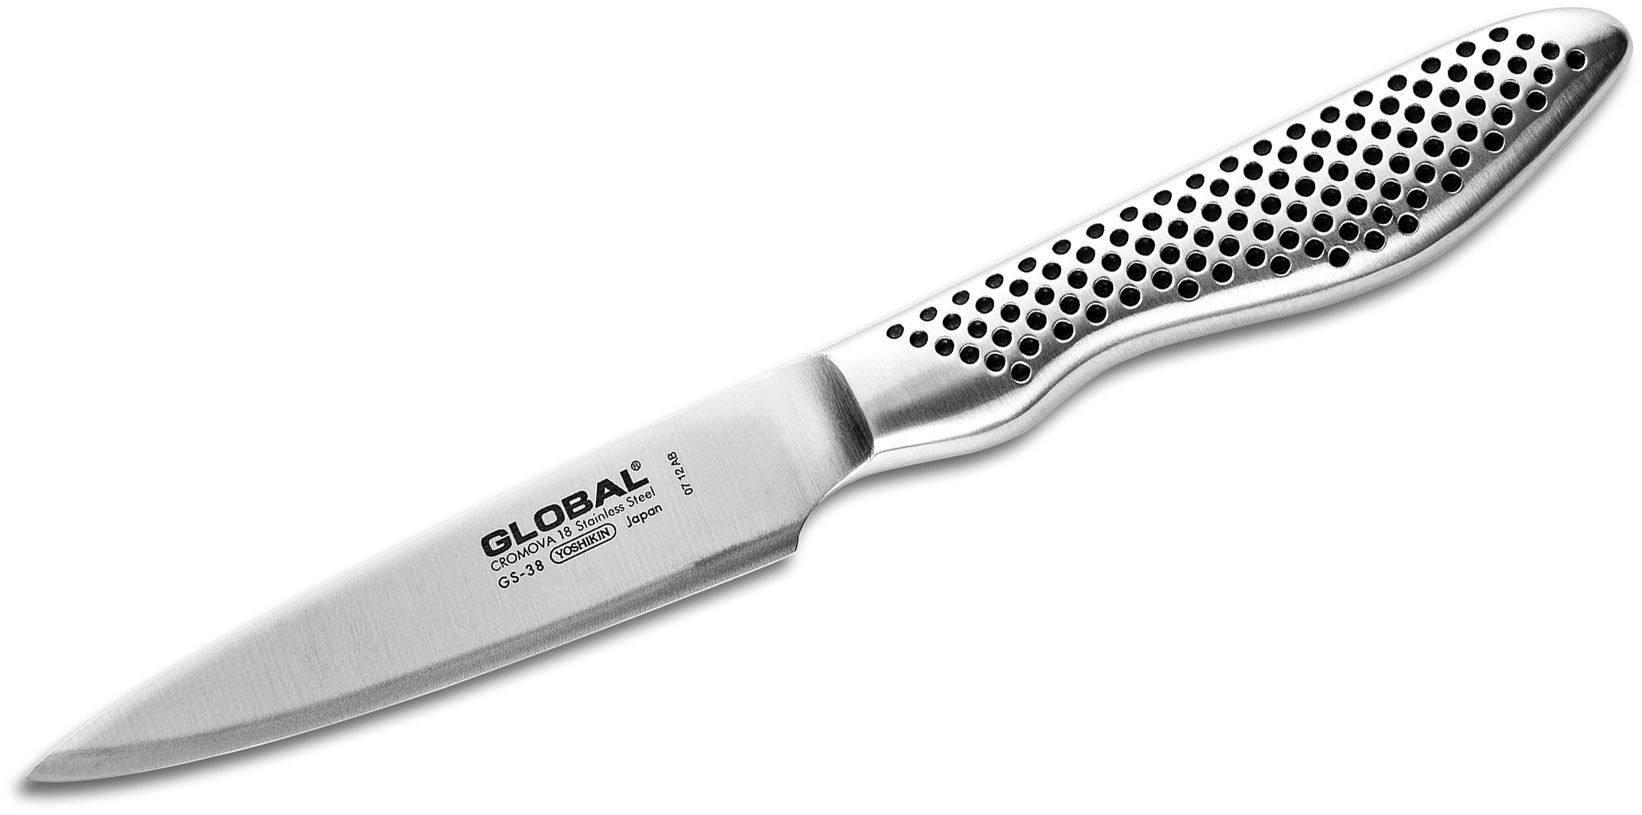 Buy a 3 Japanese Peeler Knife for Vegetables & More, Order the Classic 3  Asian Peeler Knife at Global Cutlery